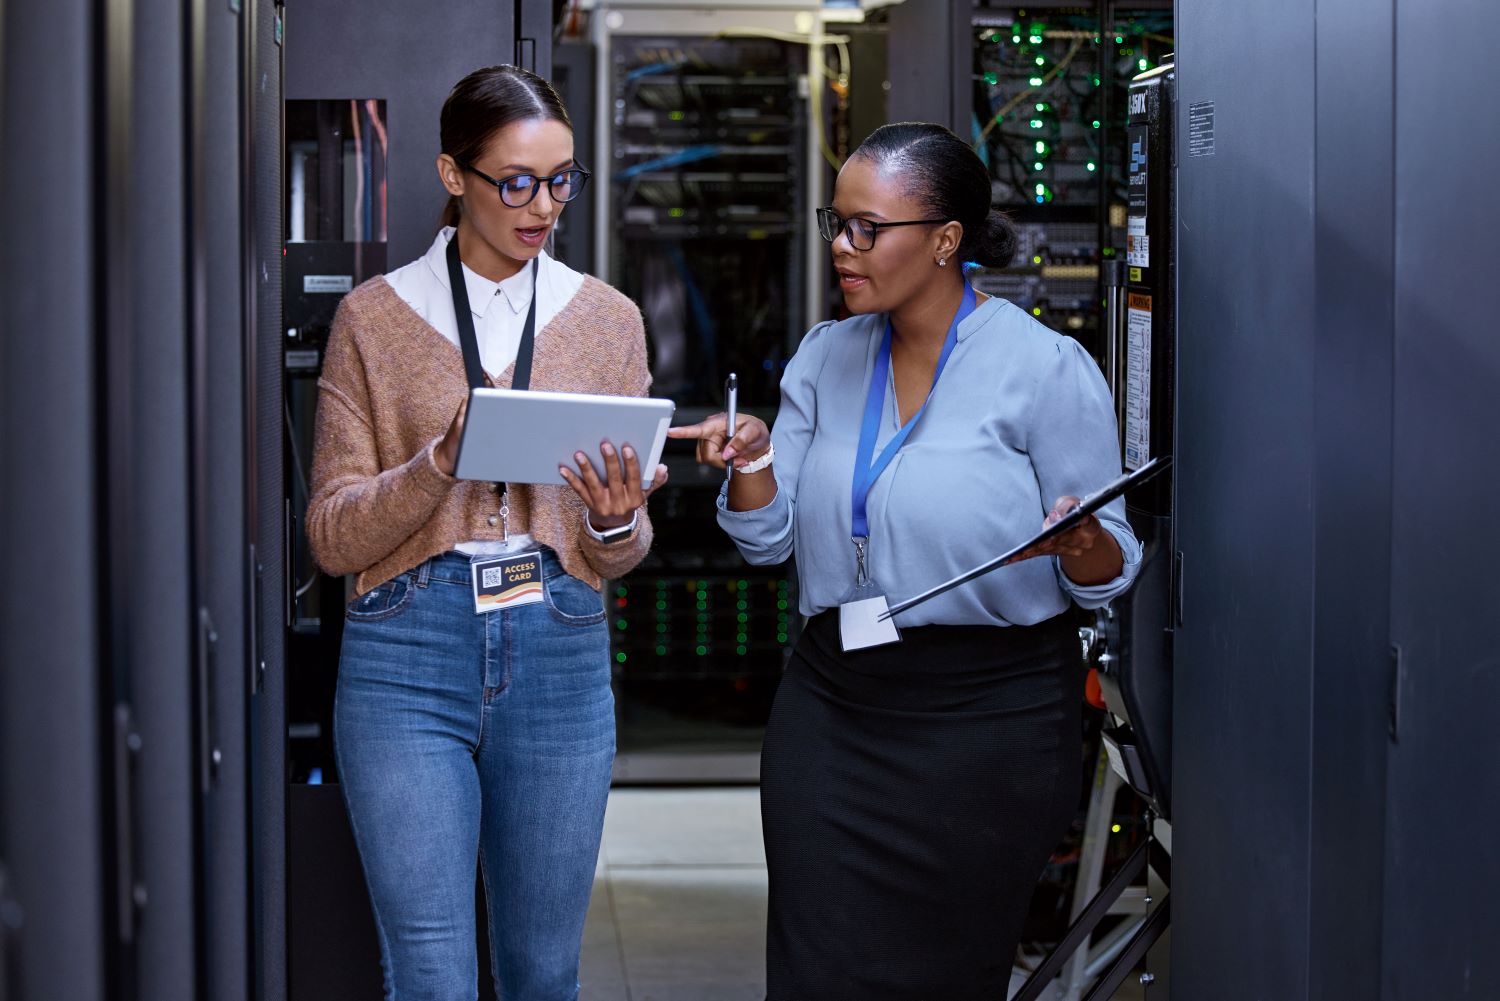 two women technology workers walking through a server room